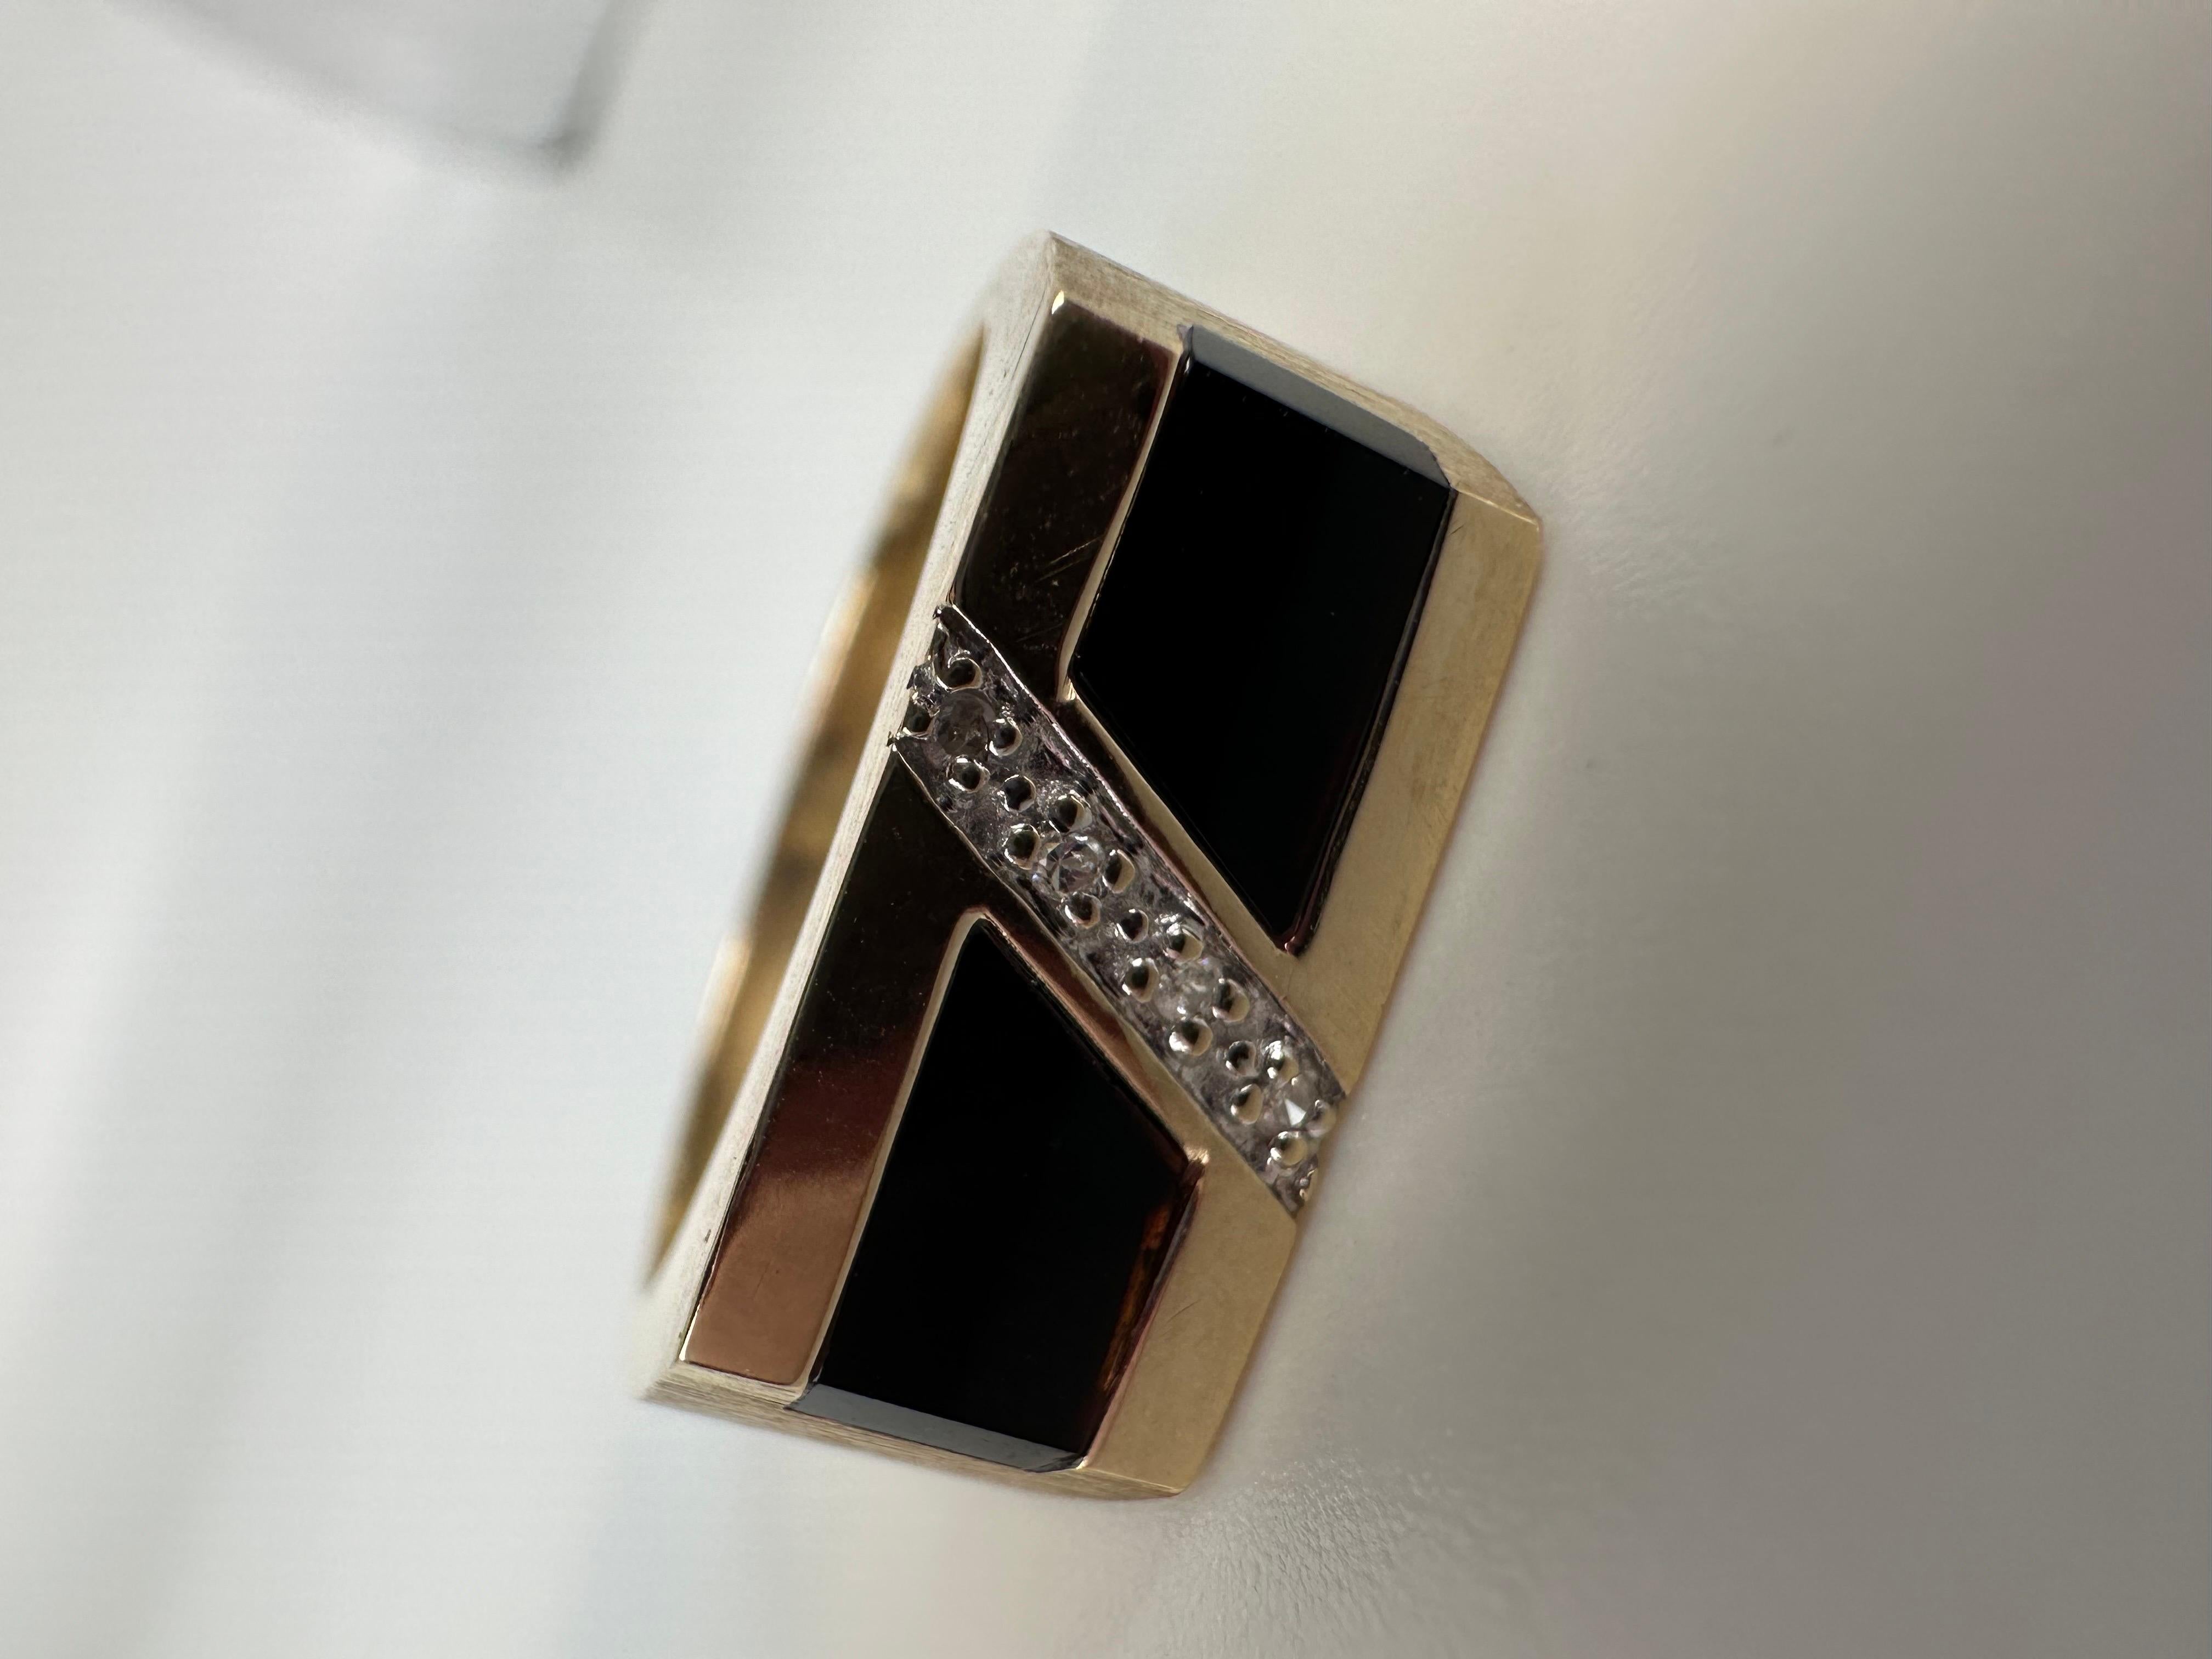 Signet unisex diamond onyx ring made in 10kt yellow gold, interestingly made with abrasive texture on the band.

GOLD: 10KT gold
NATURAL DIAMOND(S)
Clarity/Color: SI/G
Carat:0.02ct
Cut:Round
Grams:4.91
size: 8.5
Item#: 200-00067MKA

WHAT YOU GET AT